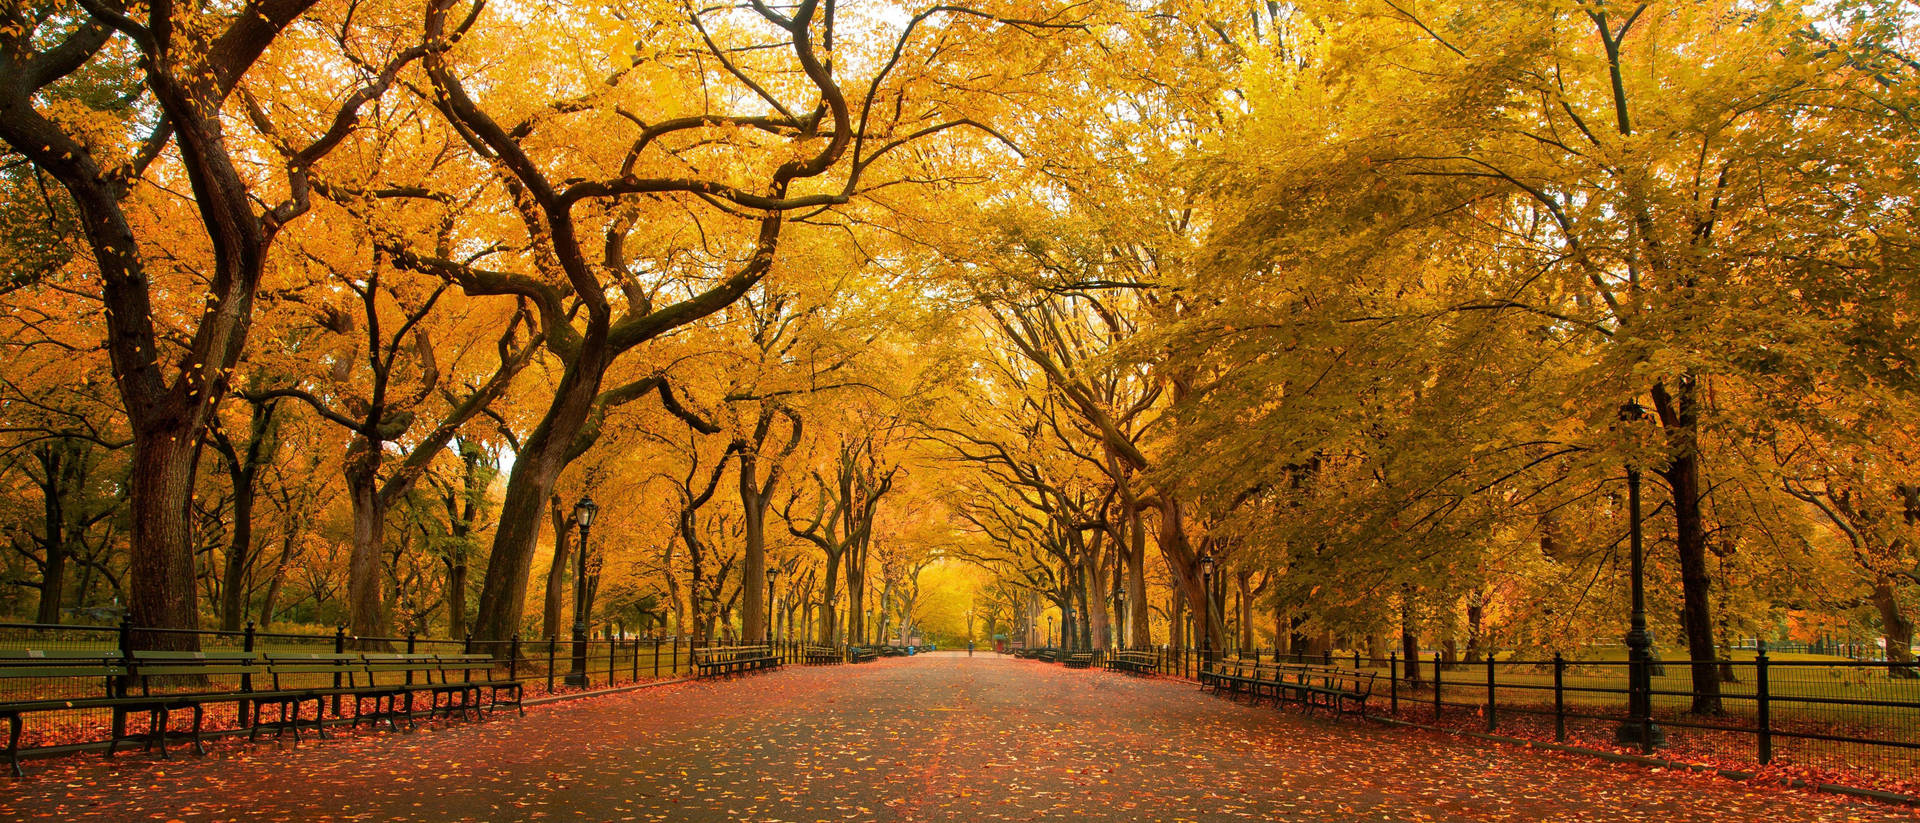 Central Park Fall 4k Ultra Widescreen Background